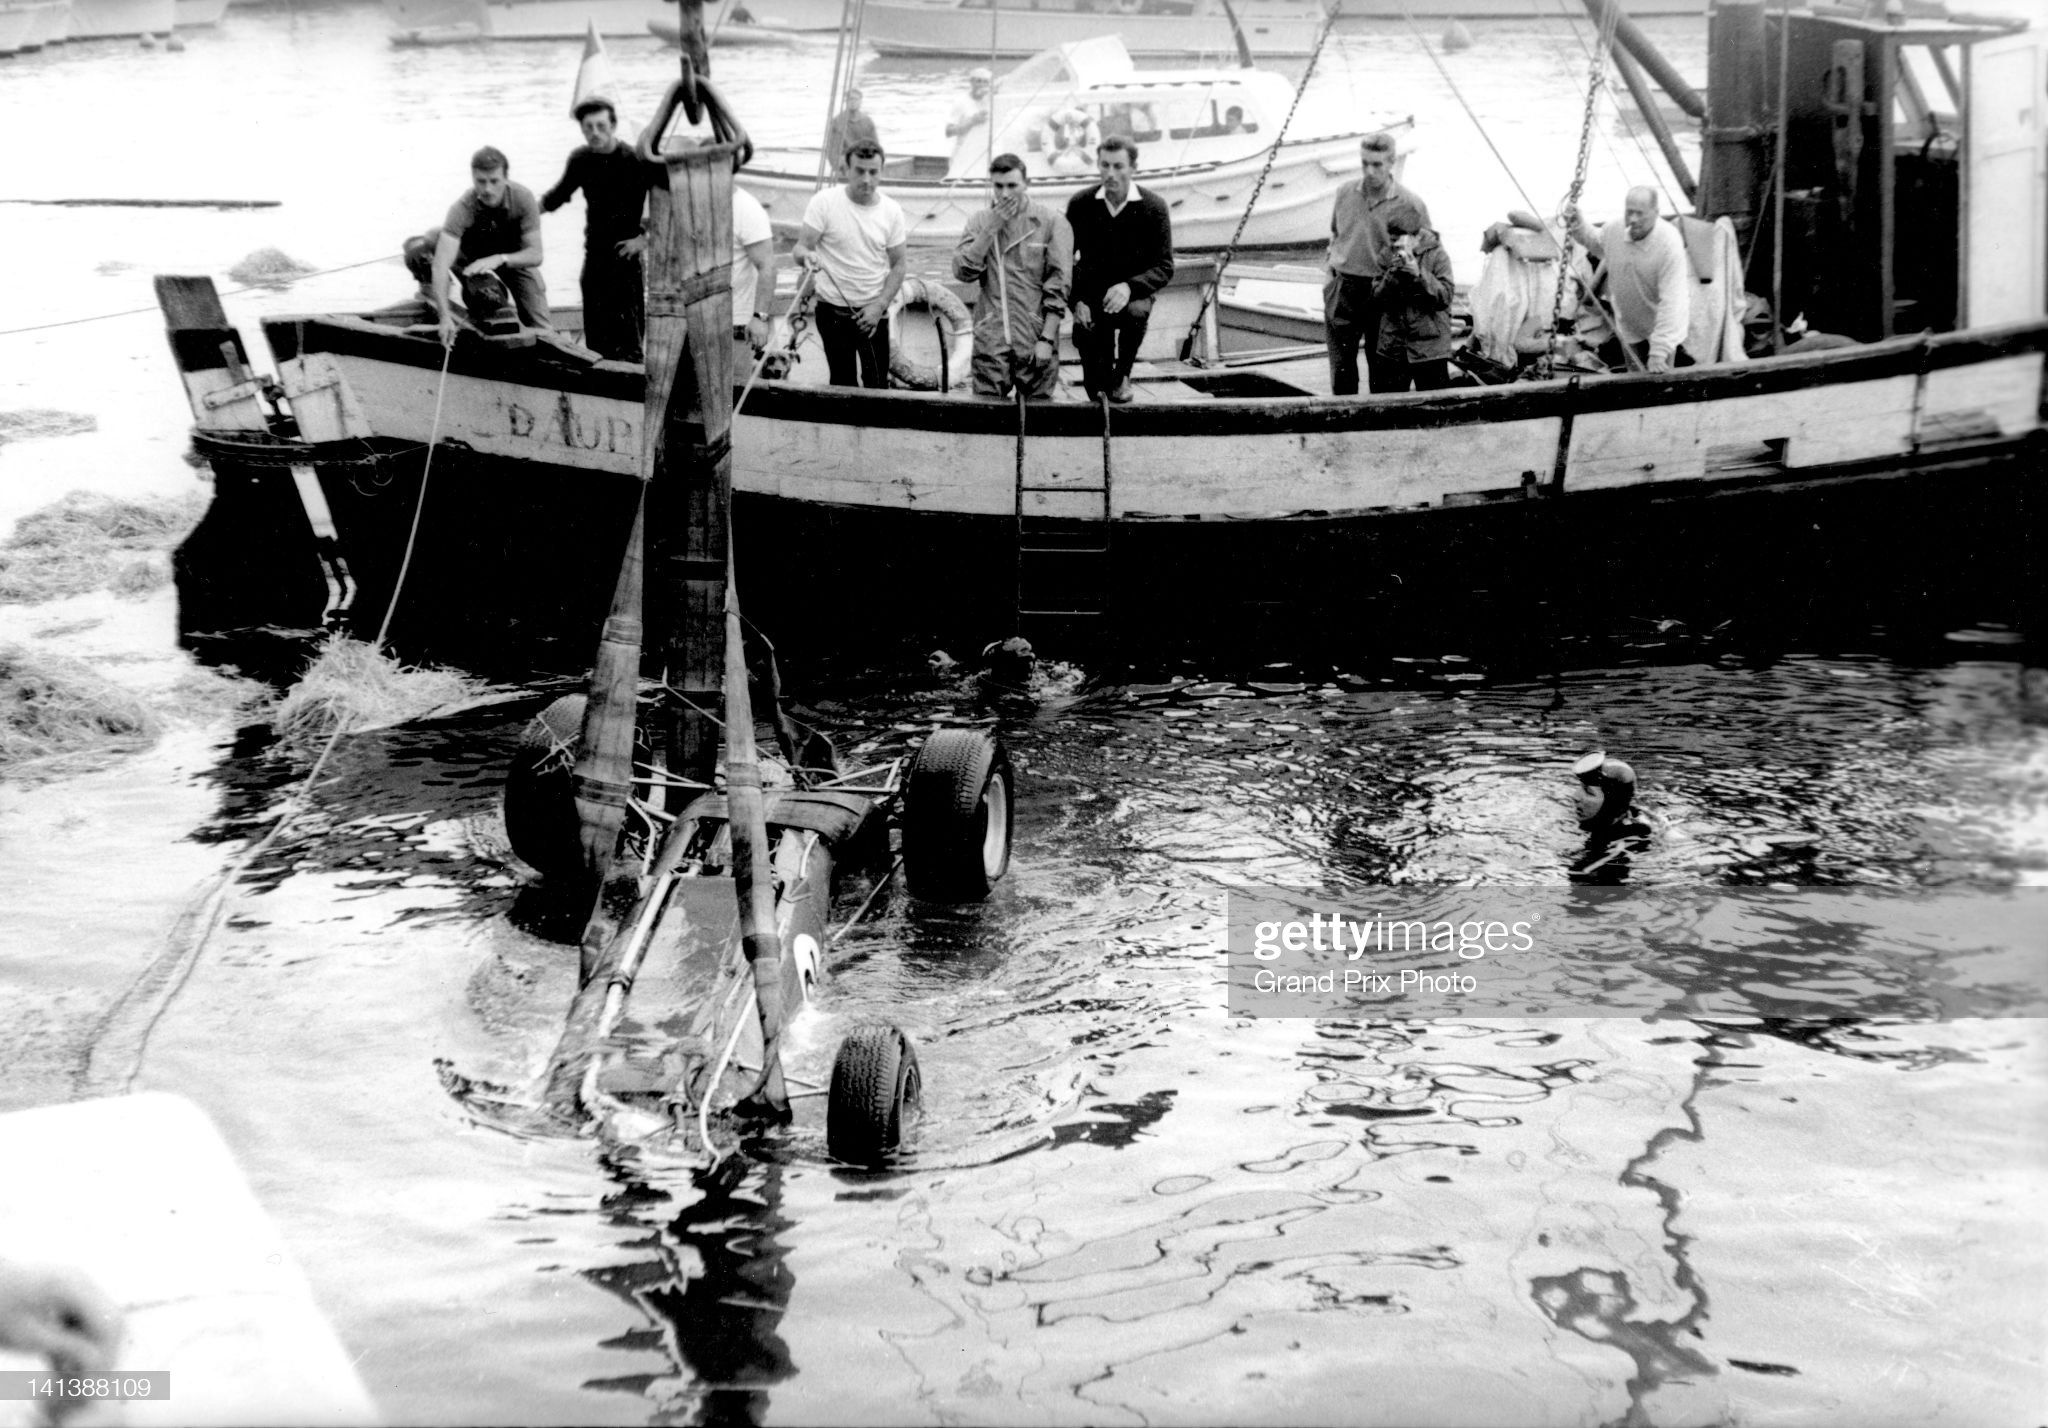 Lotus 33 Climax V8 of Paul Hawkins is recovered from the harbour after crashing on lap 79 during the Monaco Grand Prix on 30th May 1965.